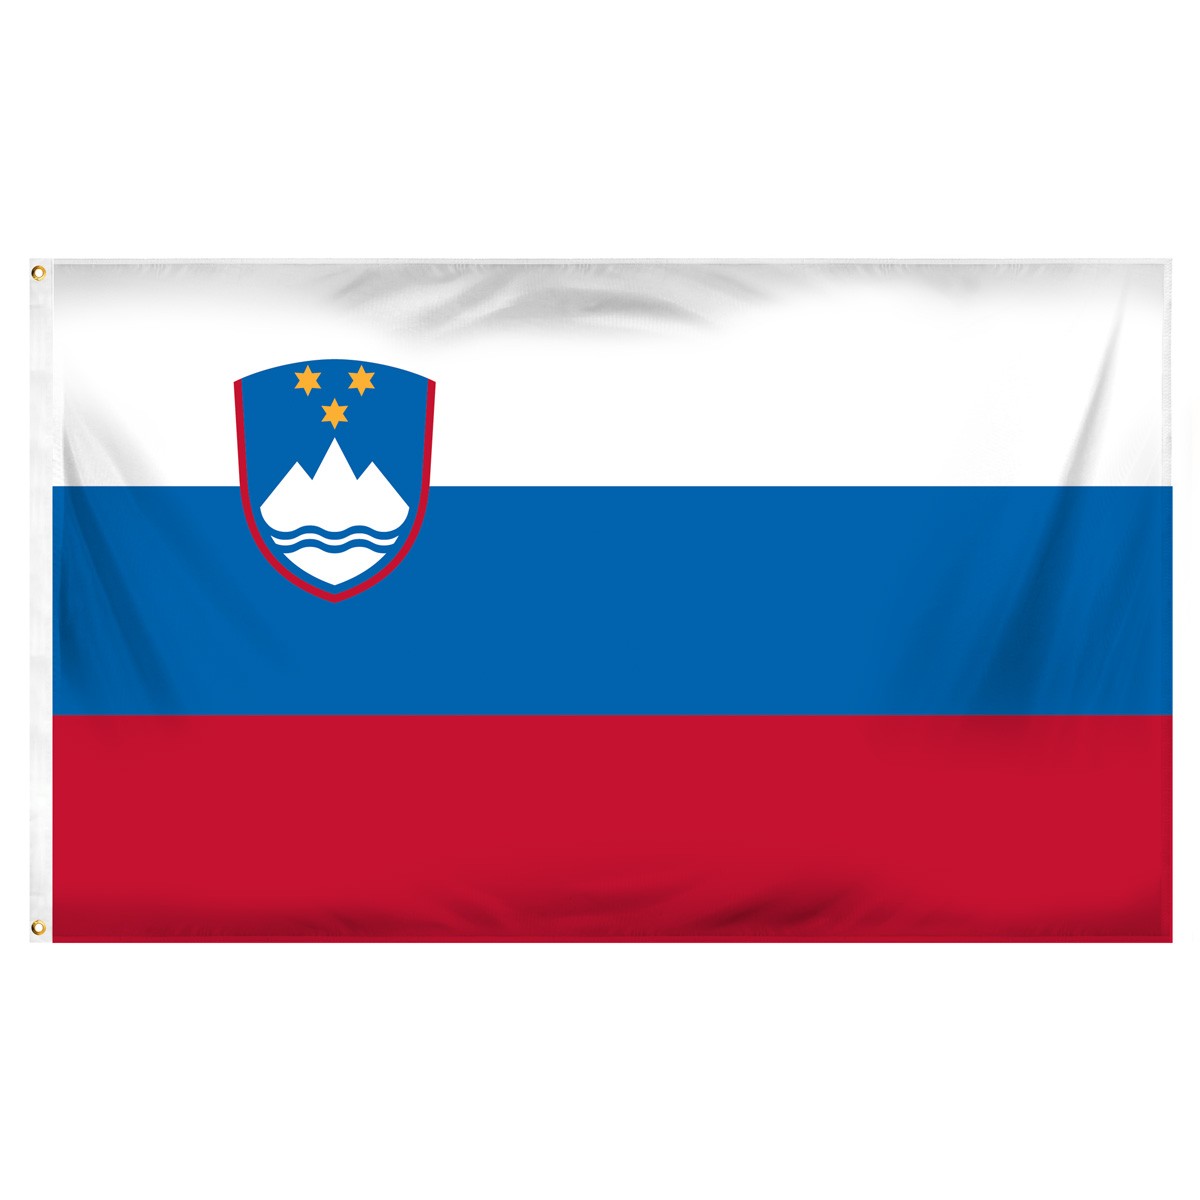 Slovenia Submit Flags and Flags